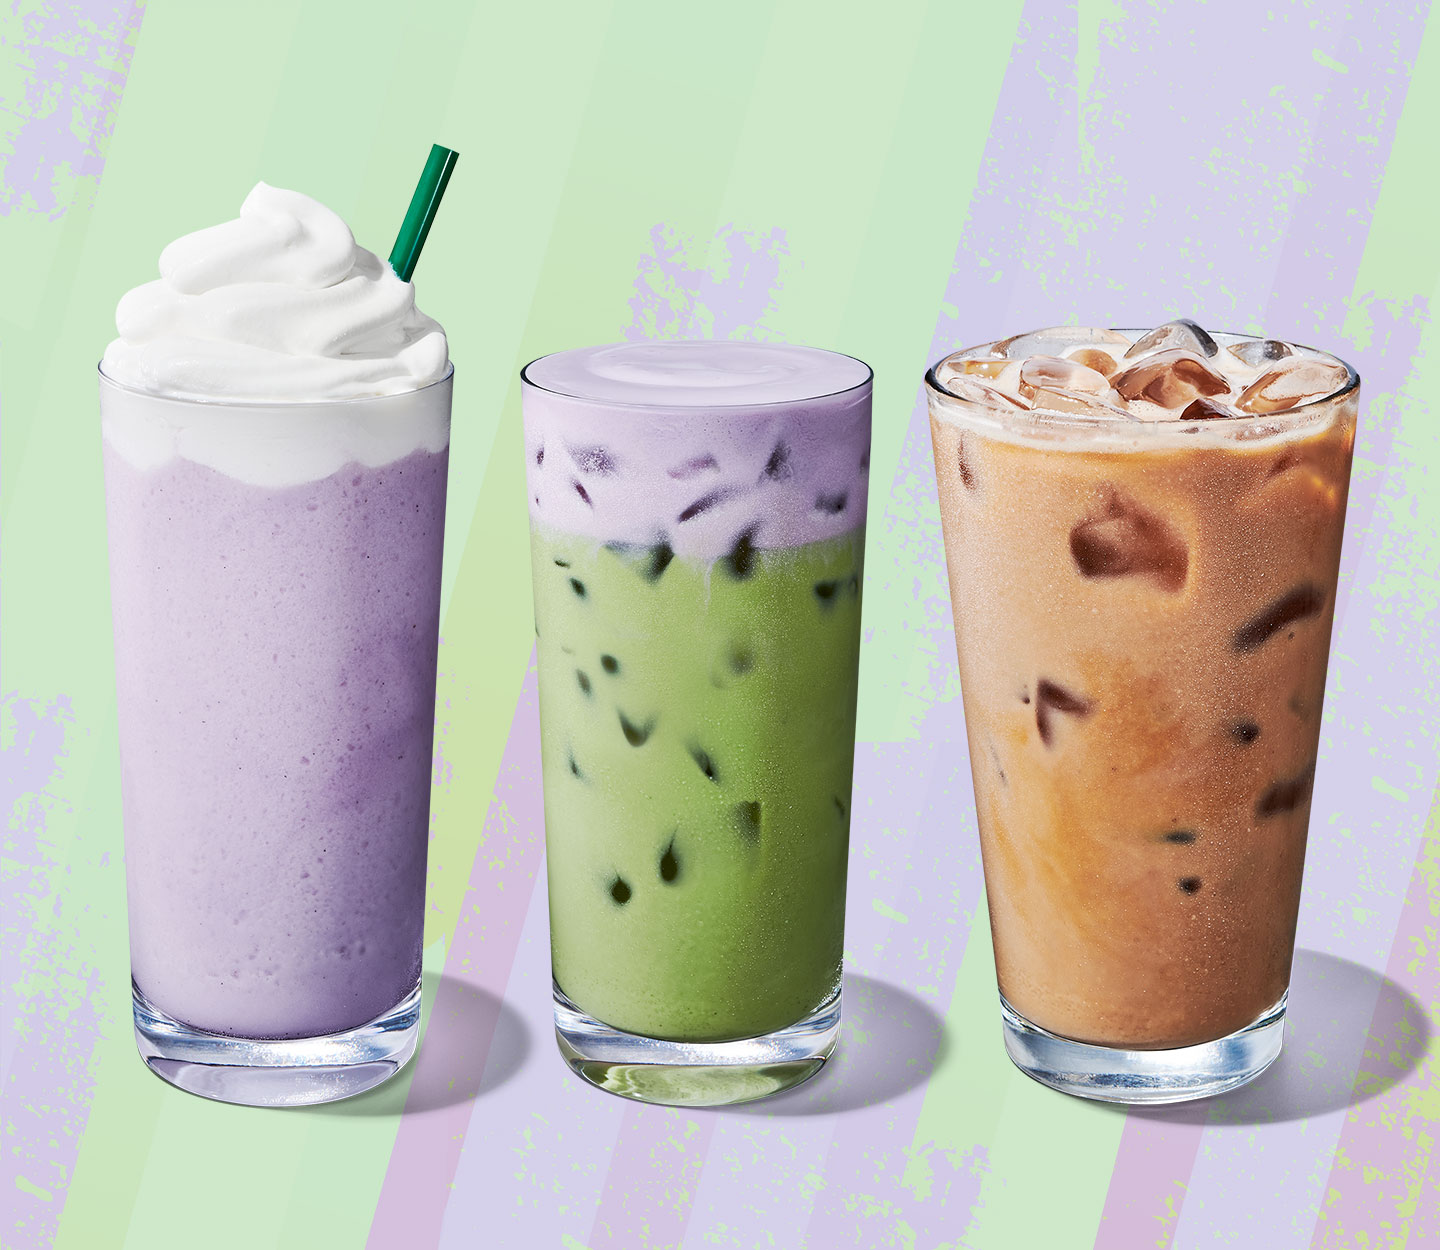 Lavender-hued blended drink, an iced green tea with a foamy topping and a creamy latte.